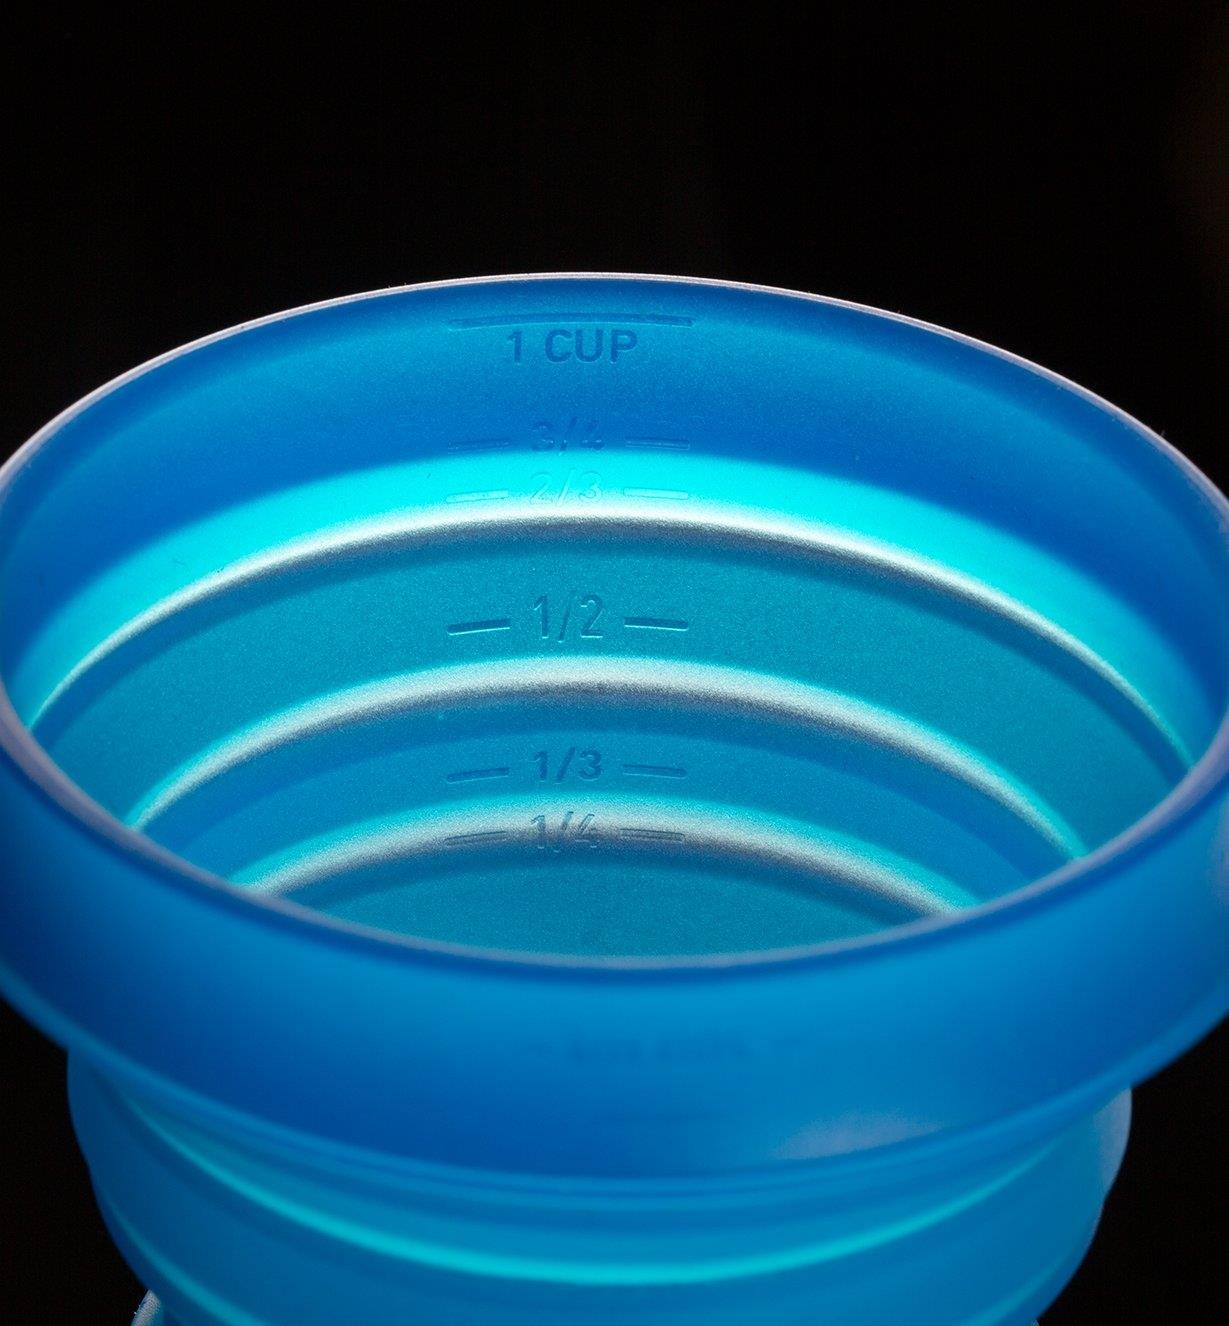 Close-up of Blue Collapsible Cup showing graduations